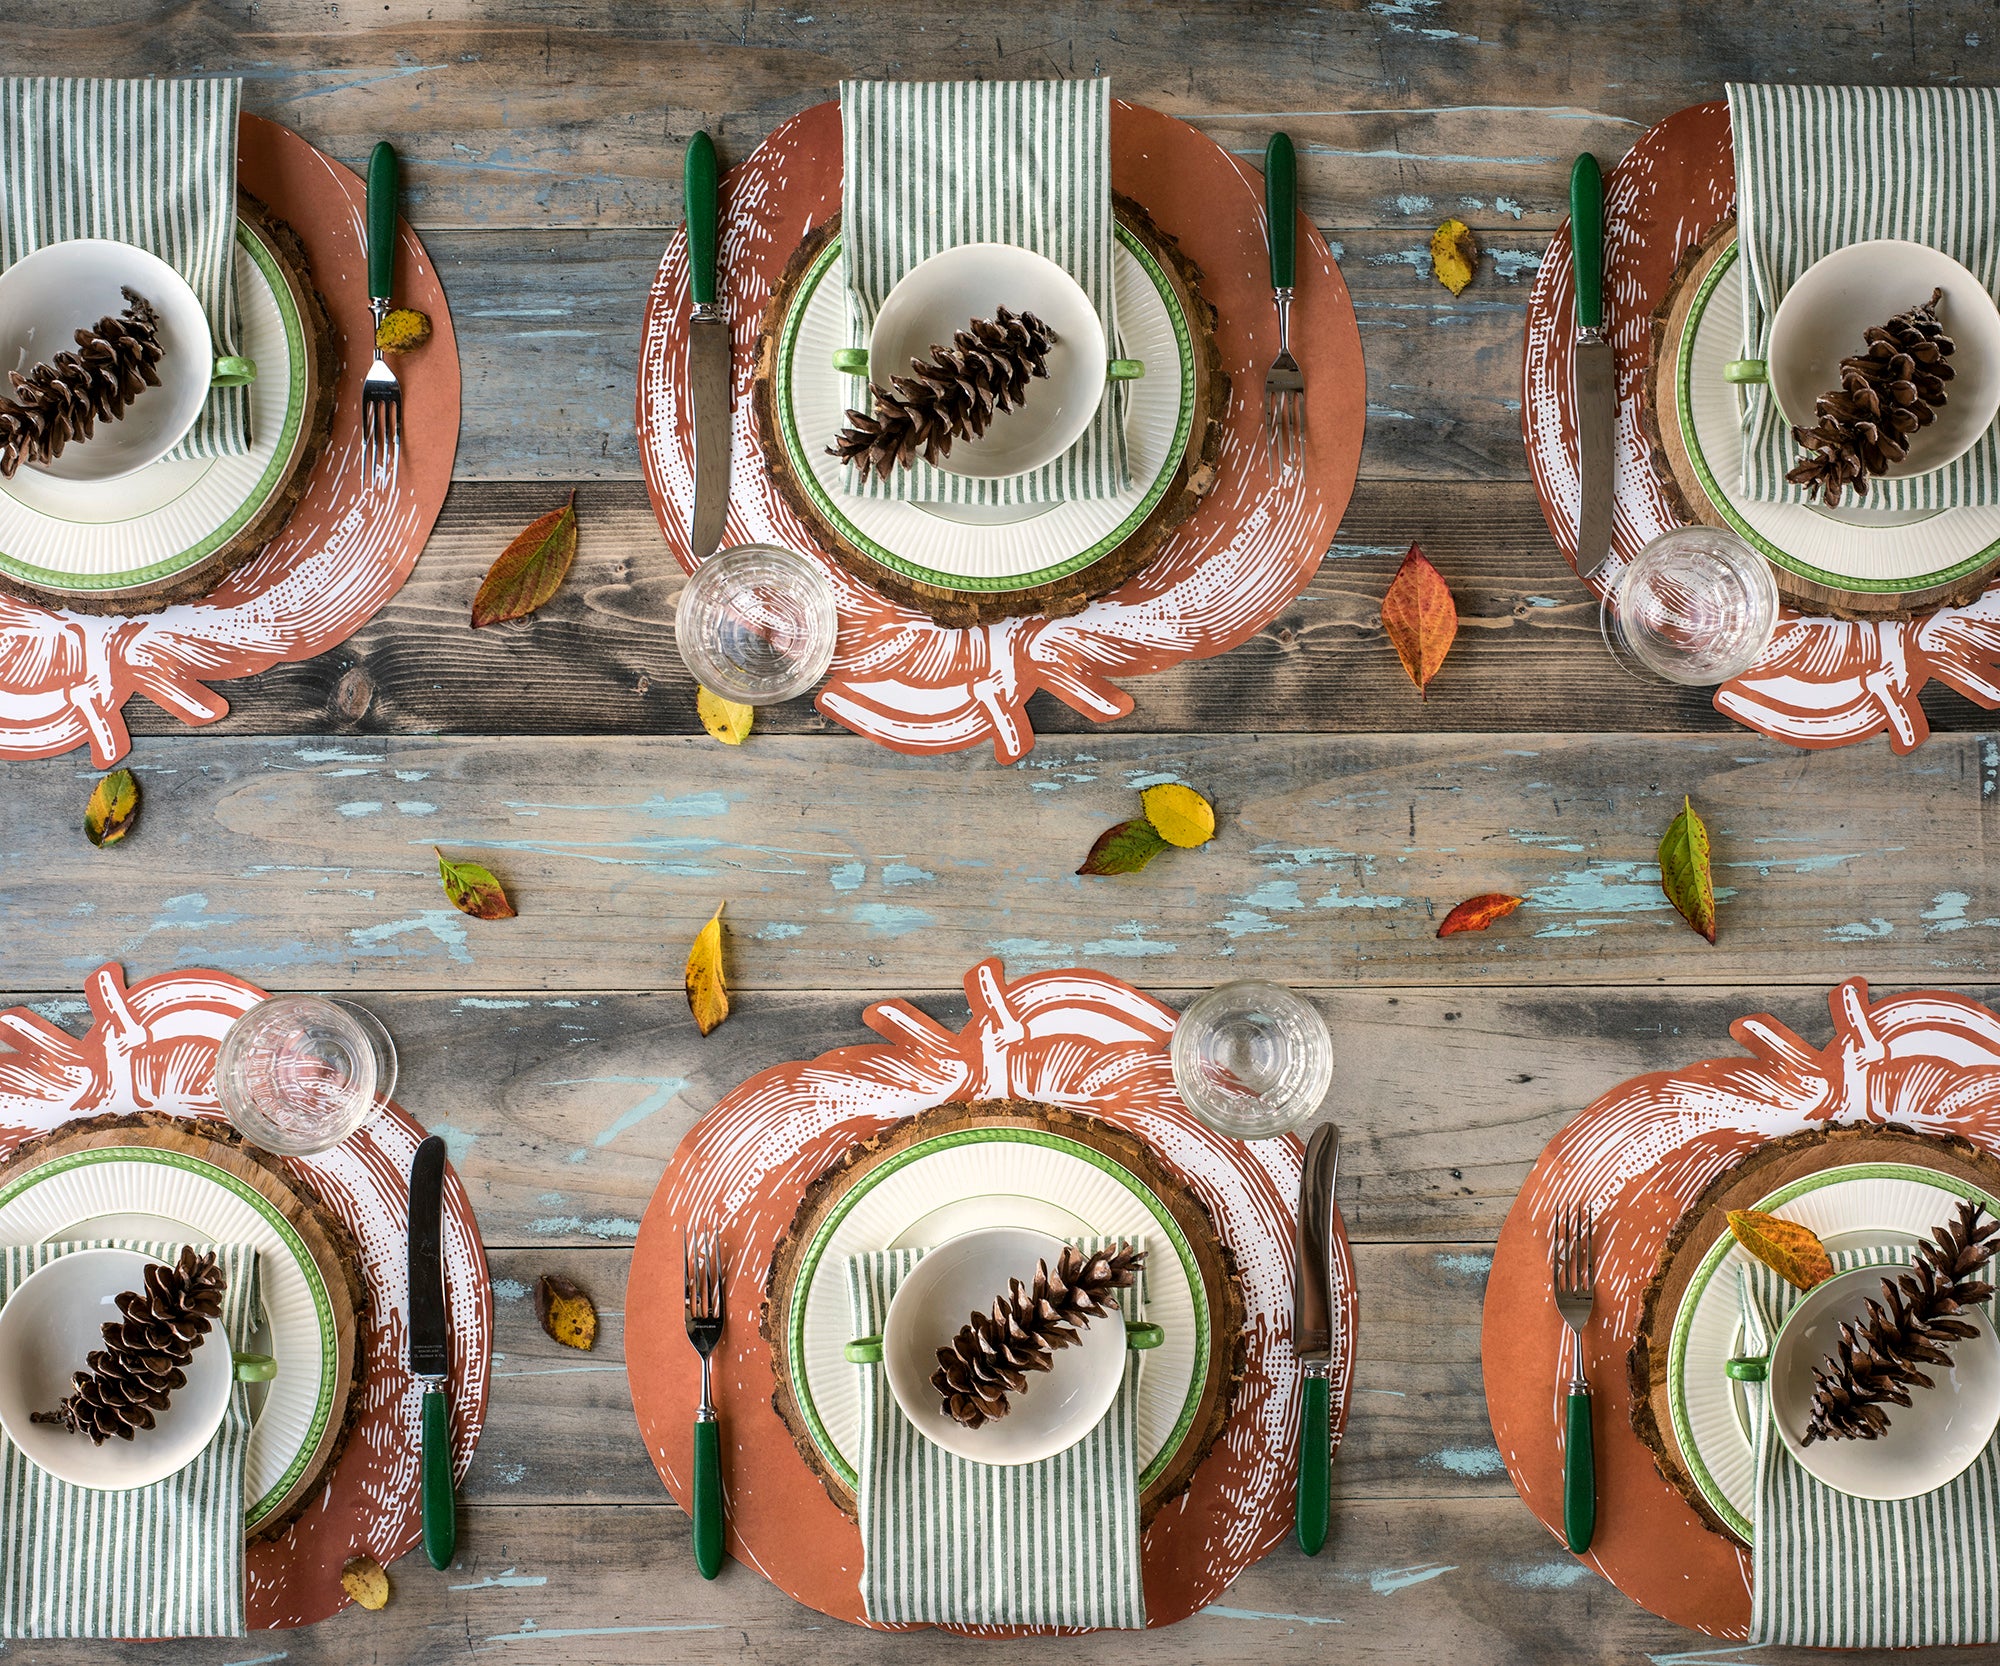 The Die-cut Pumpkin Placemat under an elegant fall-themed table setting for six, from above.